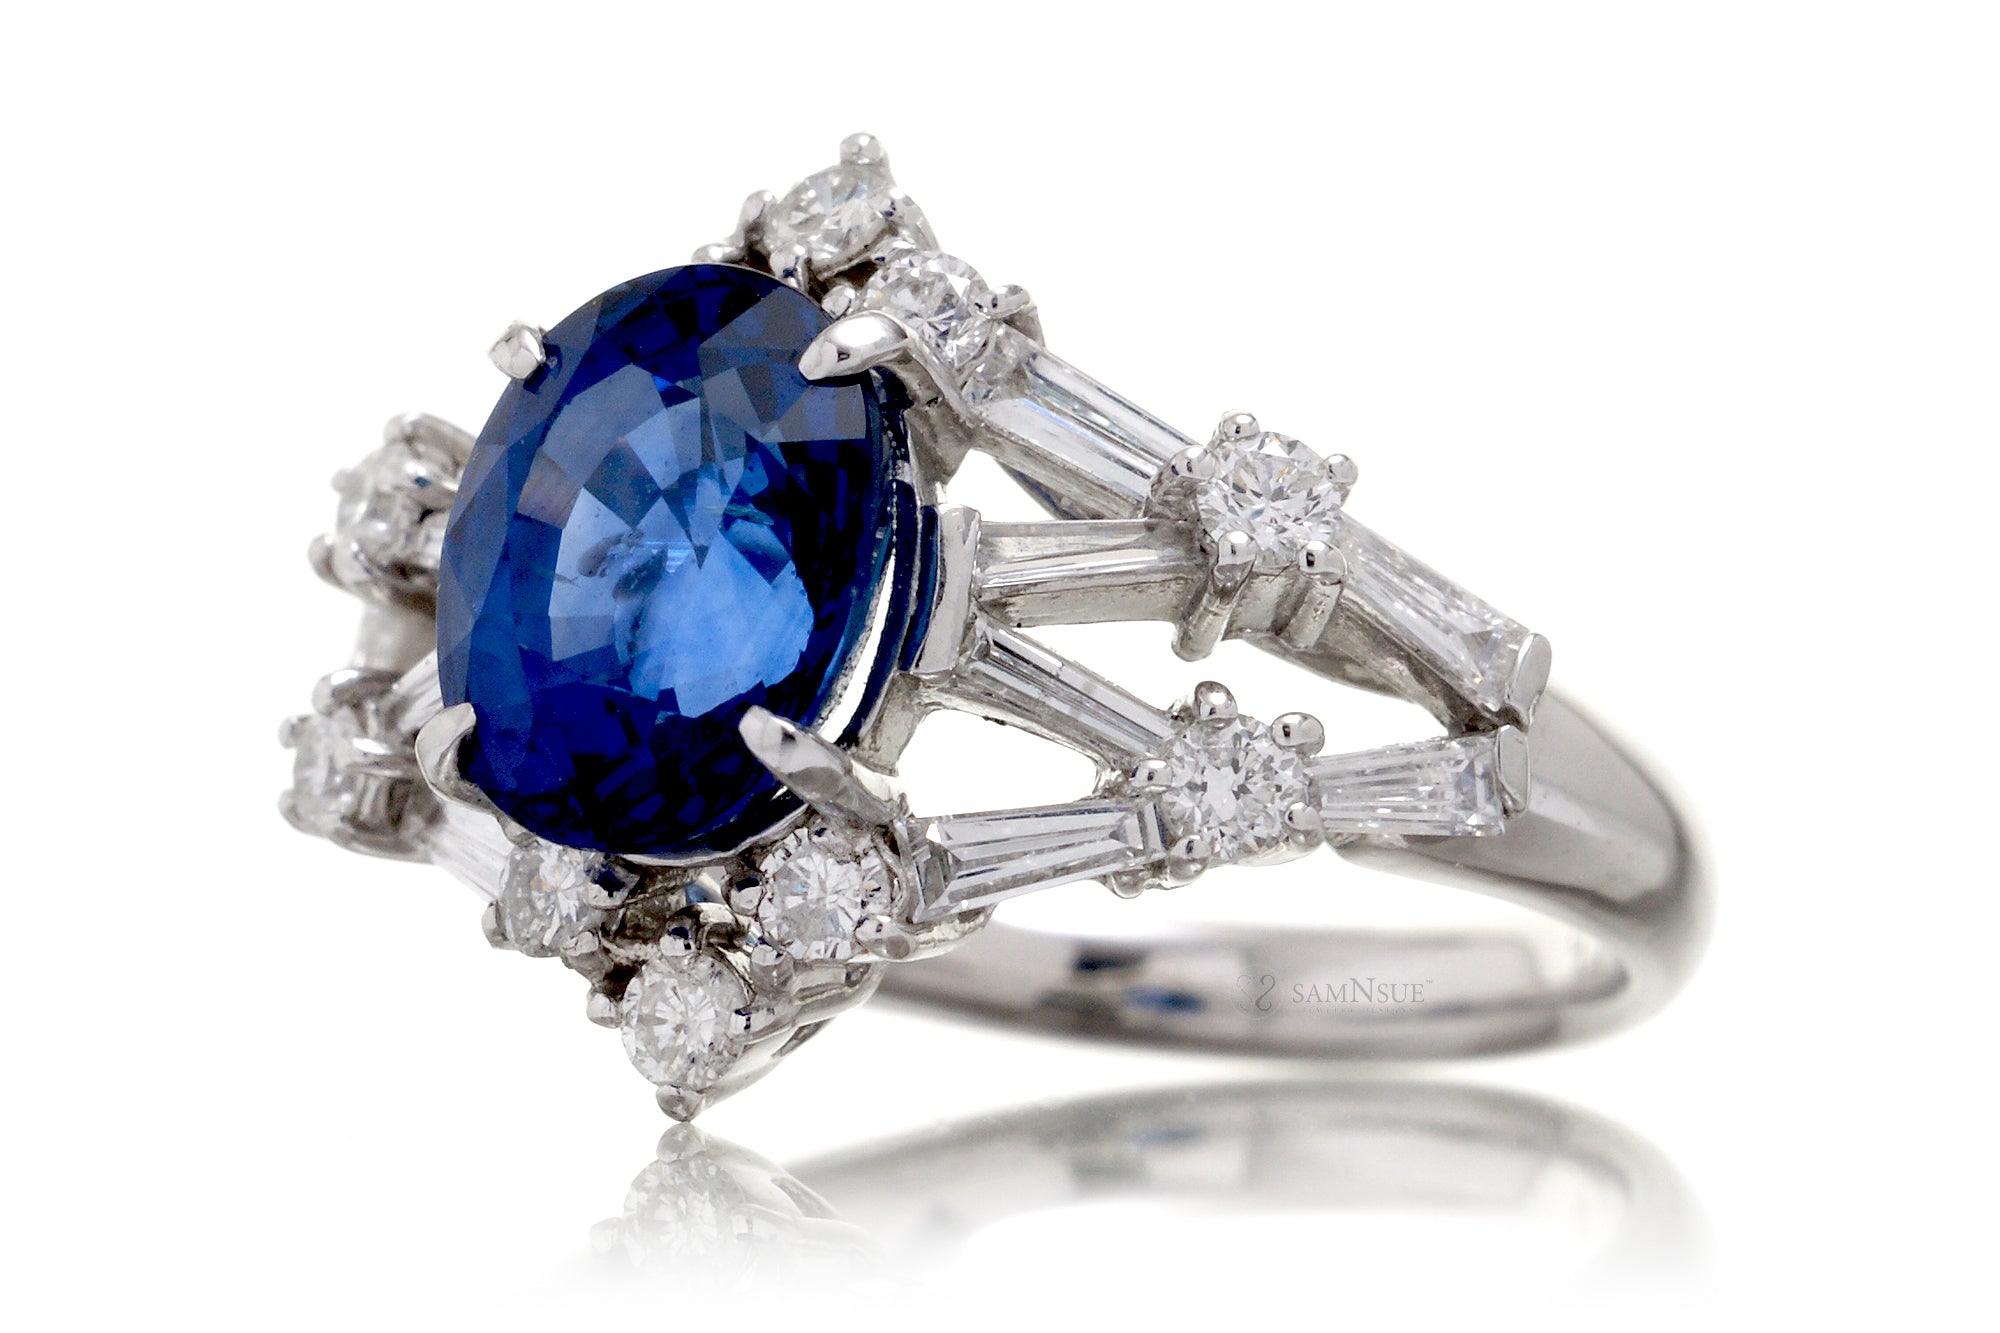 The Elise Oval Sapphire Ring